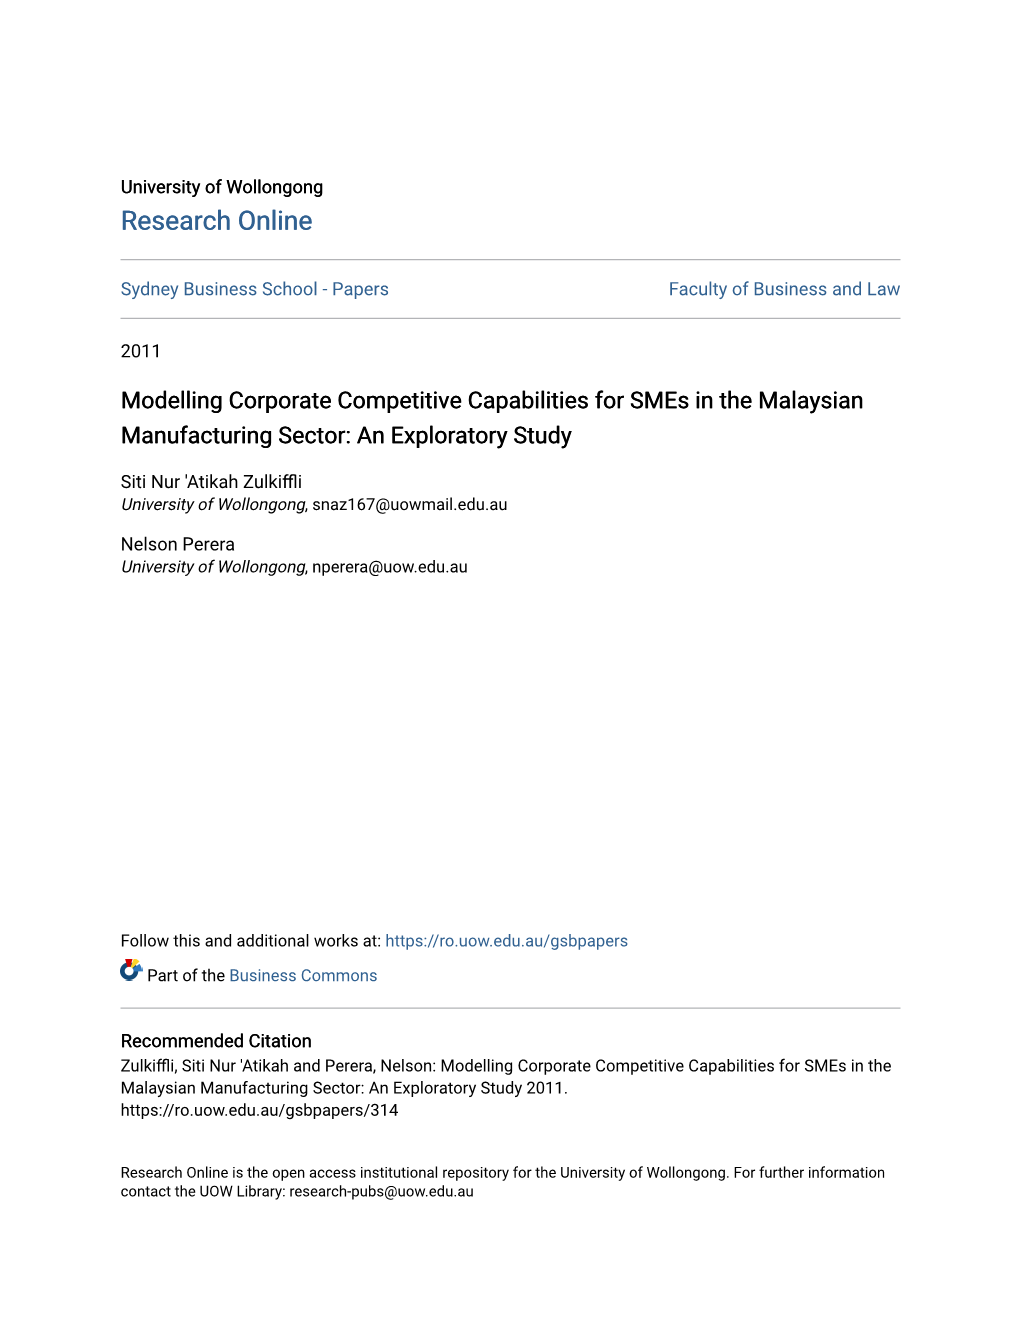 Modelling Corporate Competitive Capabilities for Smes in the Malaysian Manufacturing Sector: an Exploratory Study